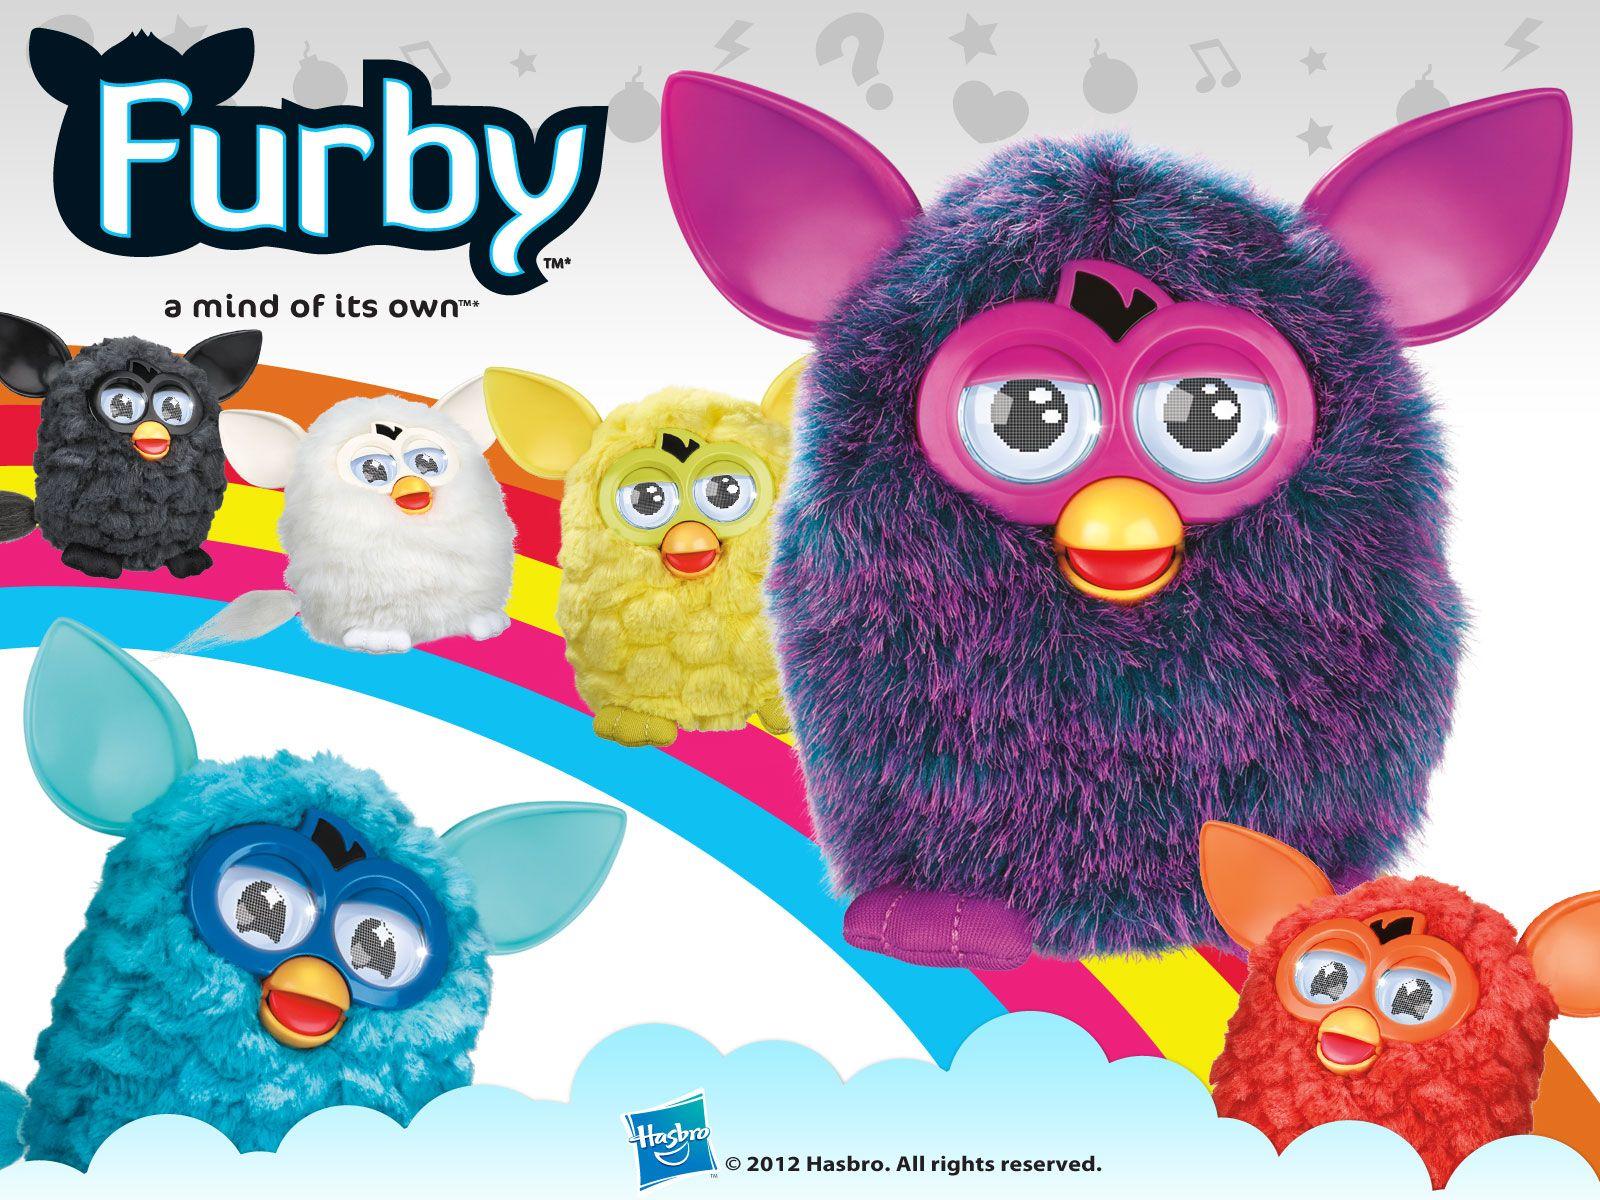 Furby mind of its own